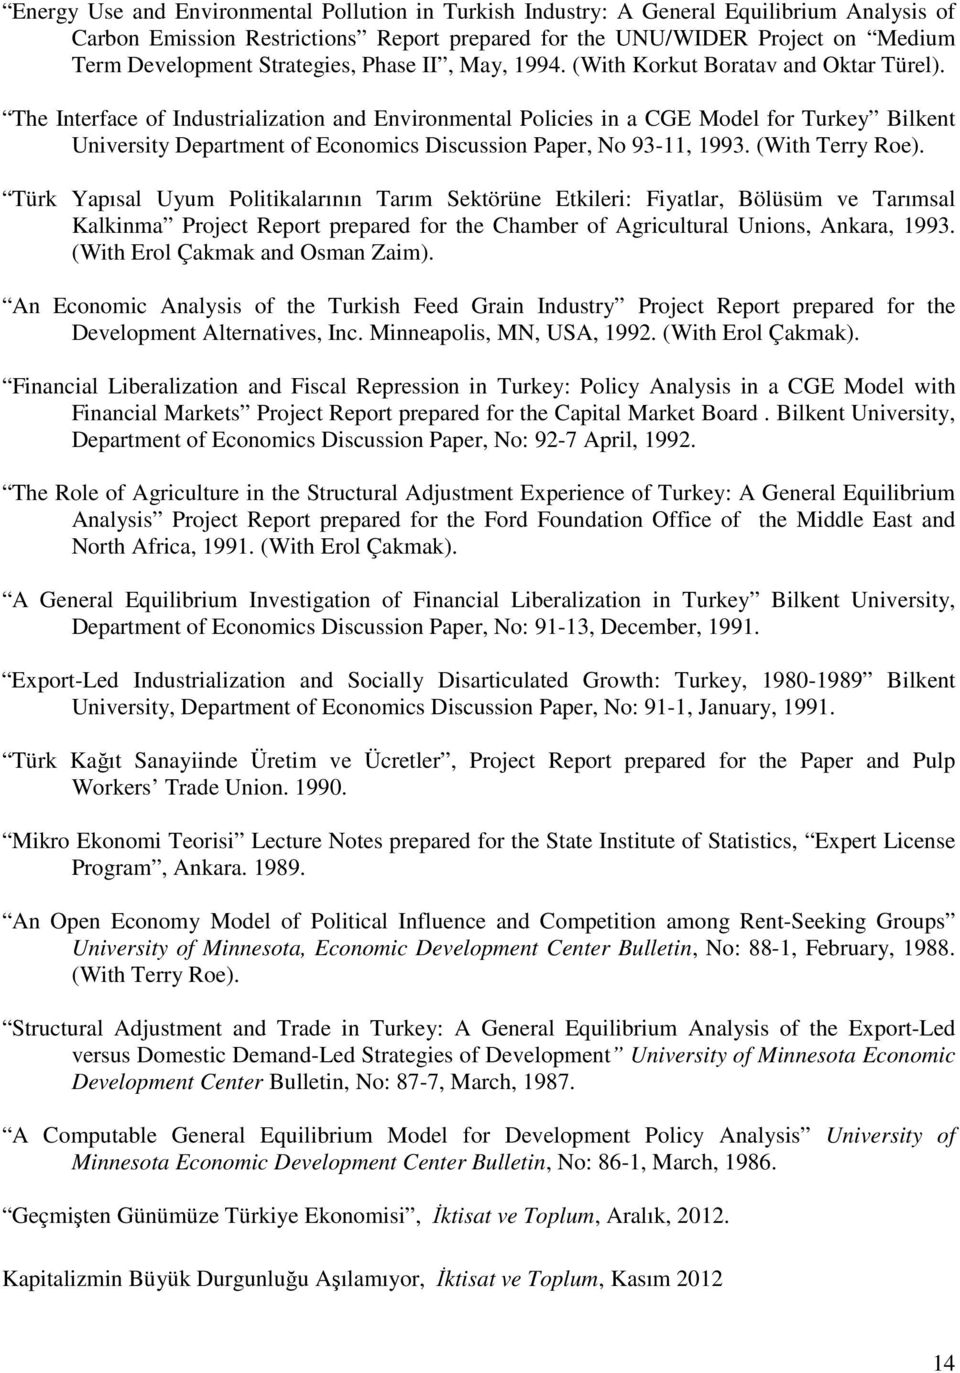 The Interface of Industrialization and Environmental Policies in a CGE Model for Turkey Bilkent University Department of Economics Discussion Paper, No 93-11, 1993. (With Terry Roe).